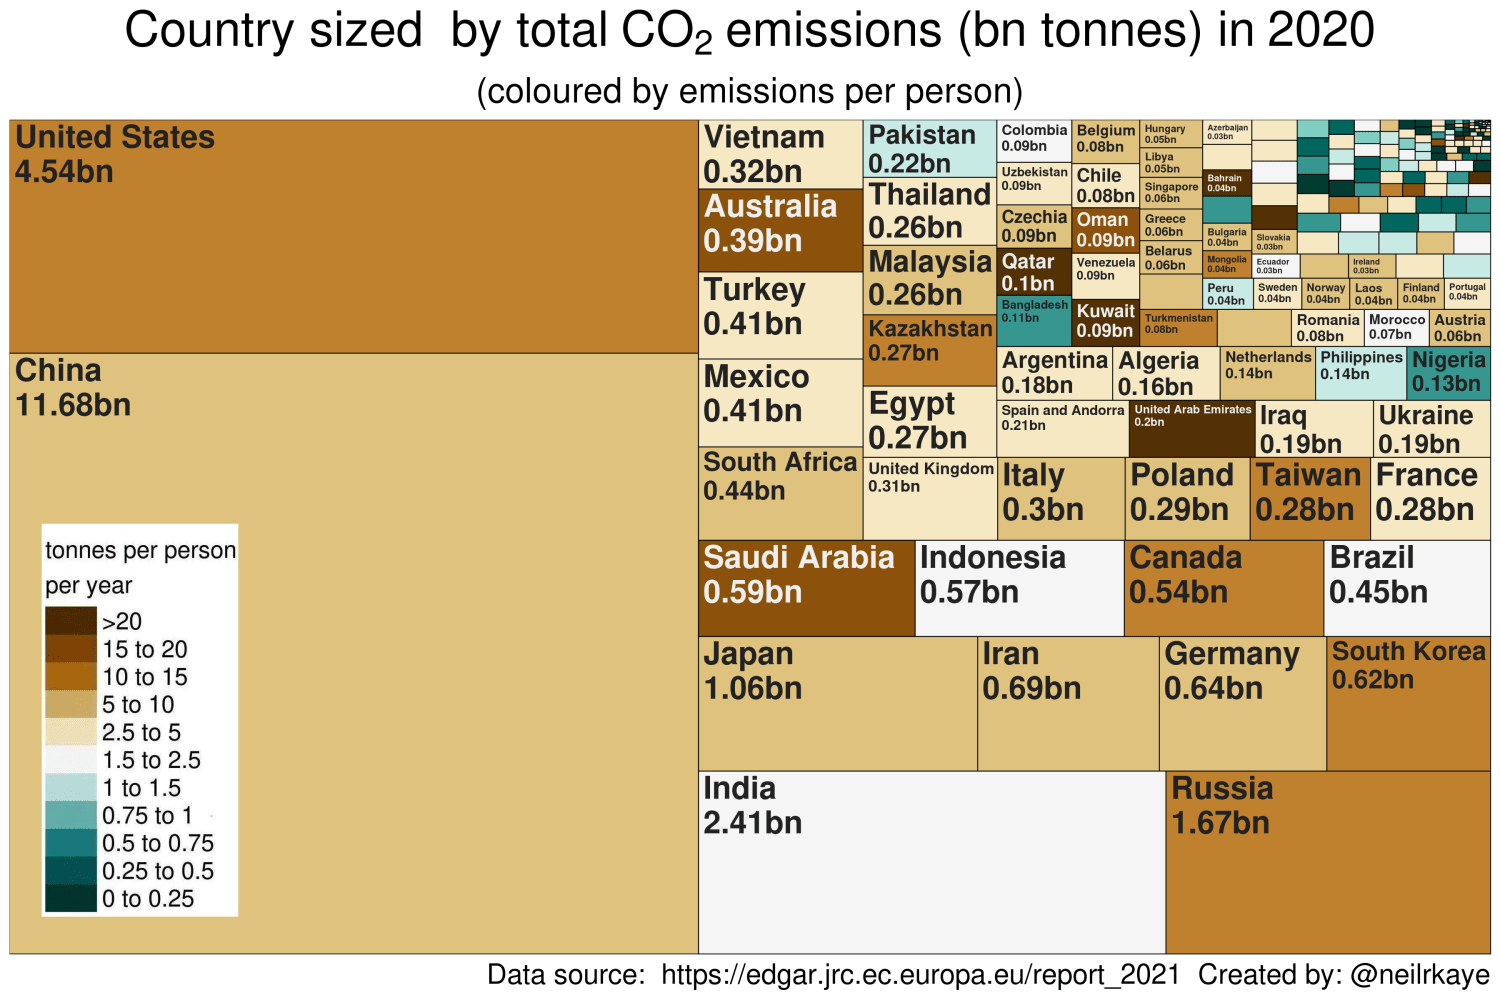 Countries scaled by CO₂ emissions in 2020.